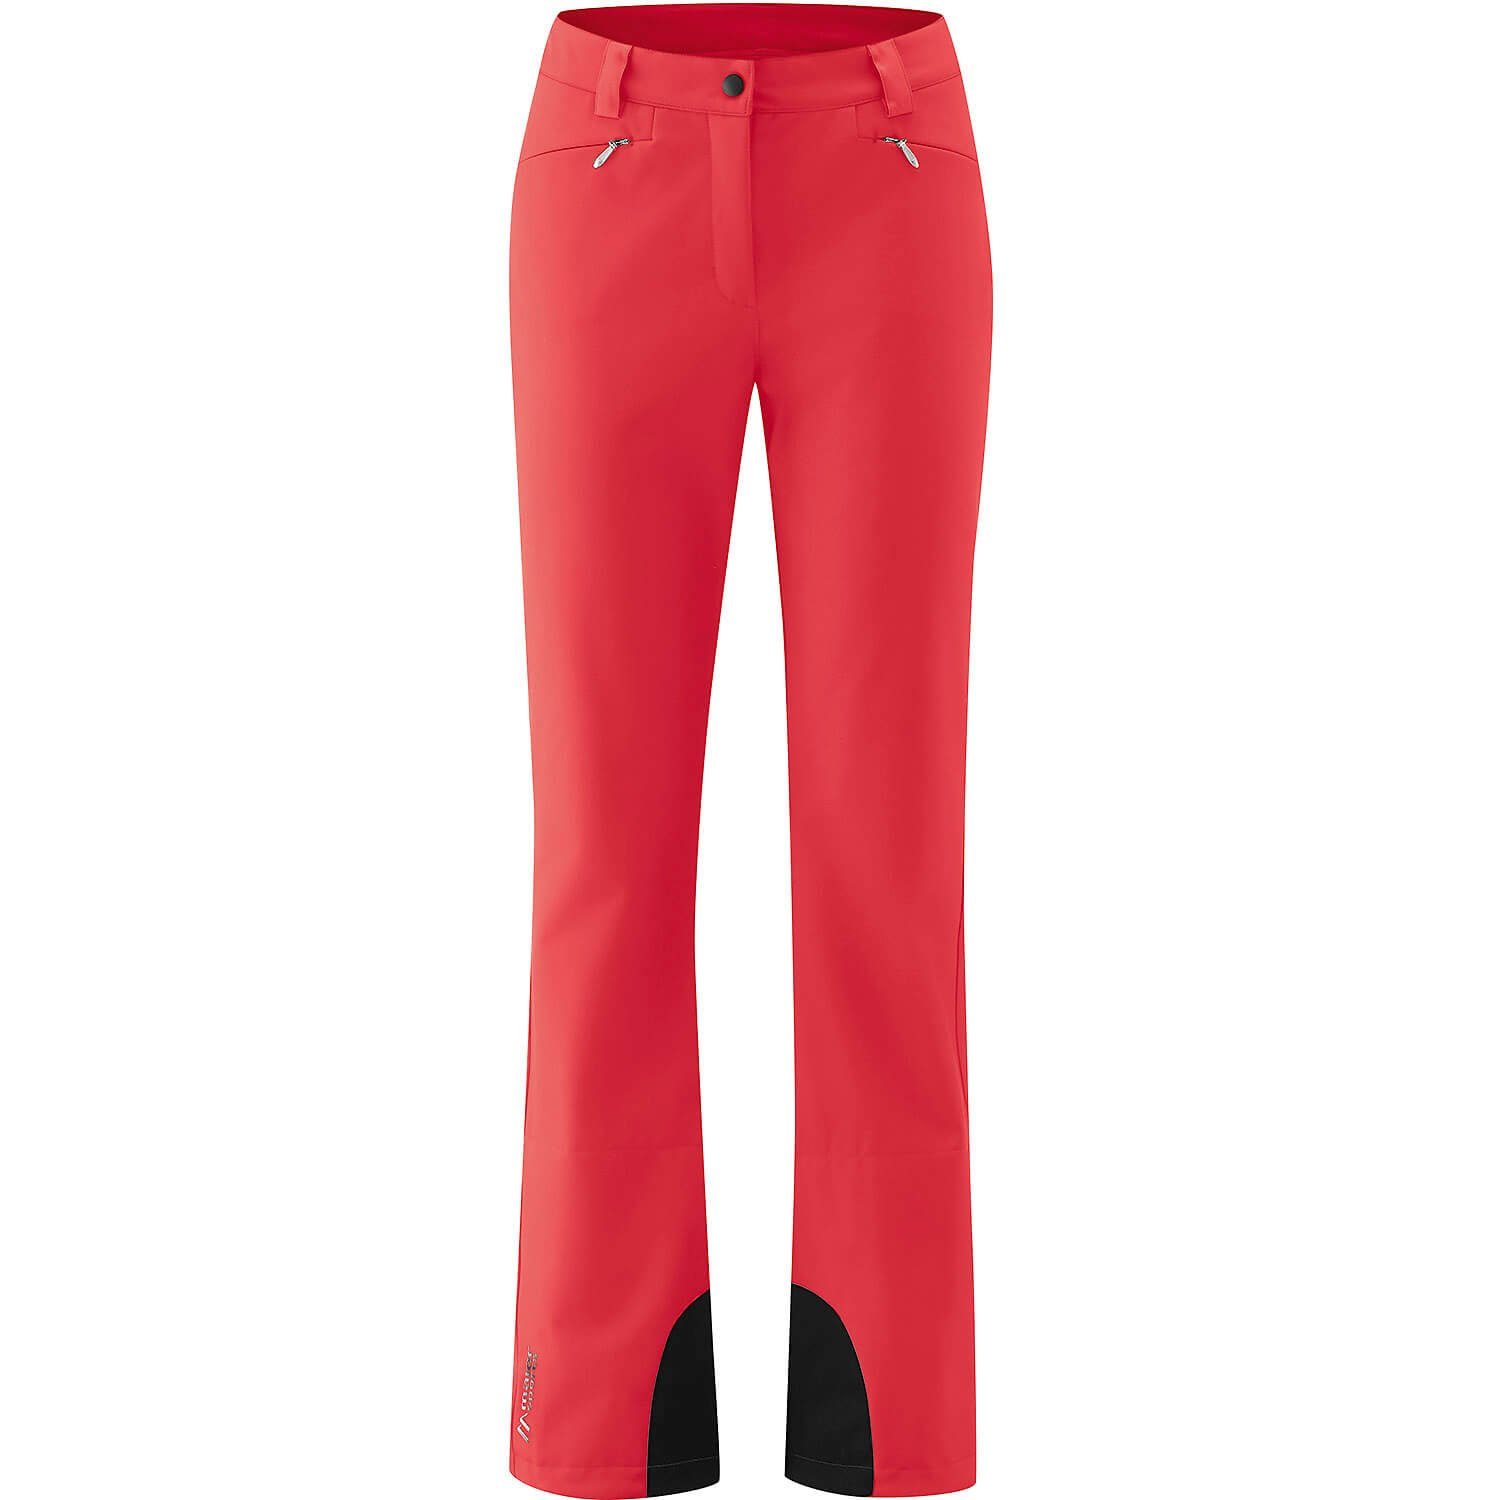 Maier Sports Funktionshose Softshellhose Mary Fire Red